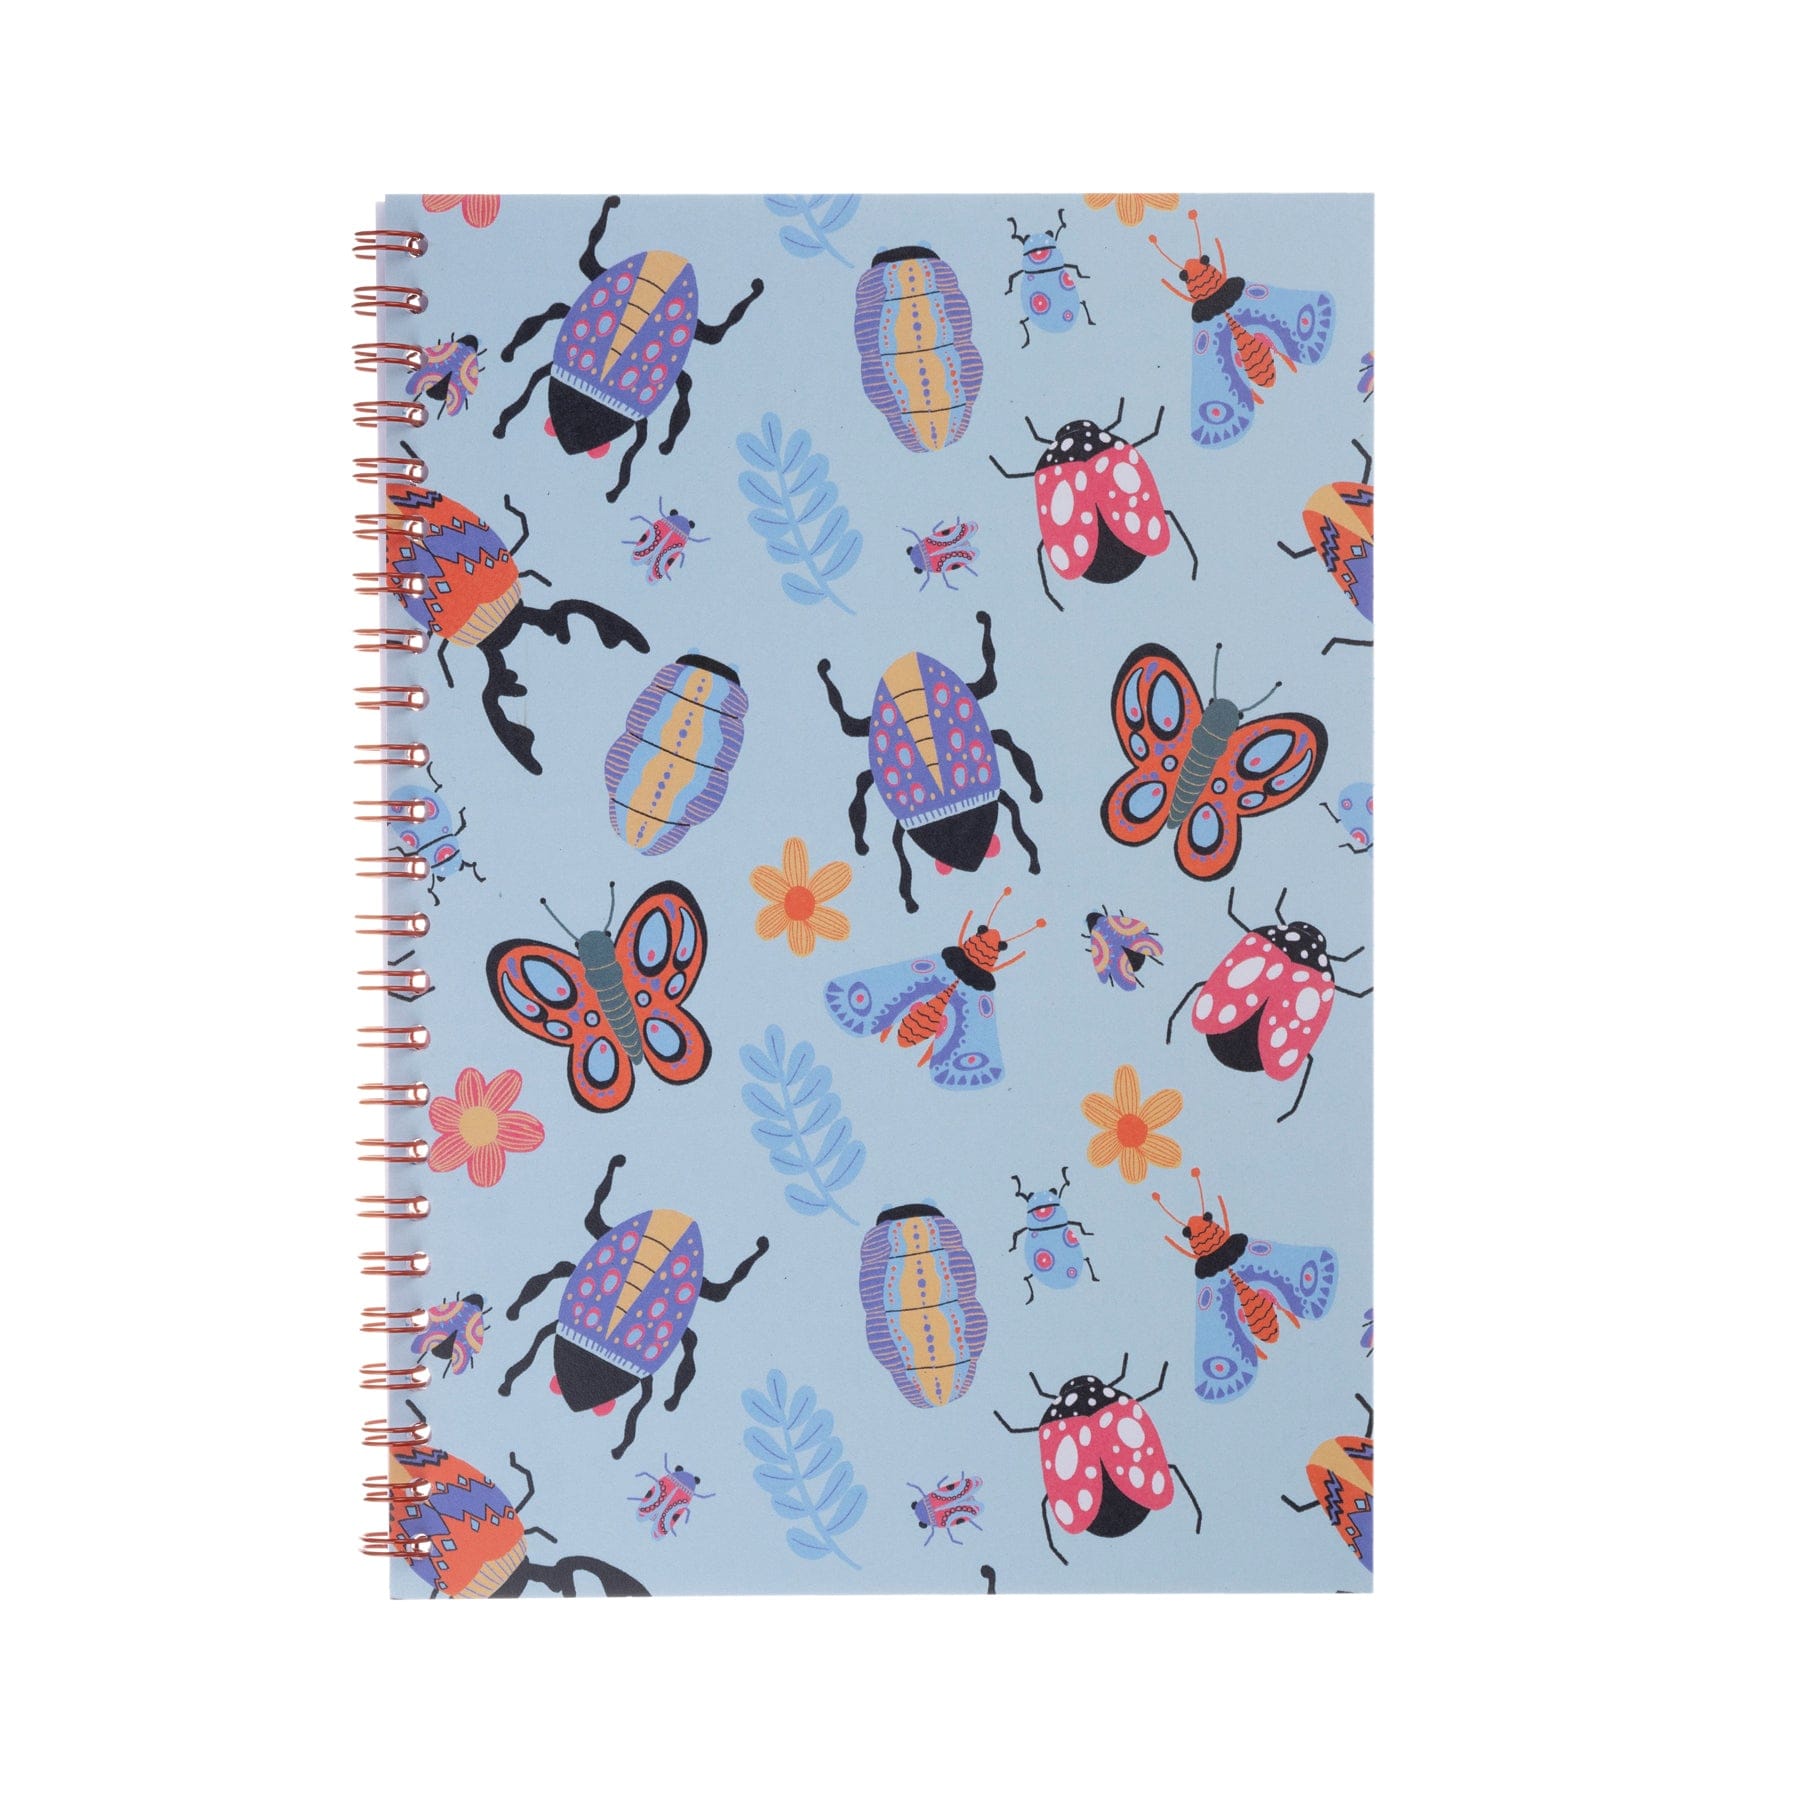 Spiral-bound notebook with colorful insect pattern design including beetles and butterflies on a blue background